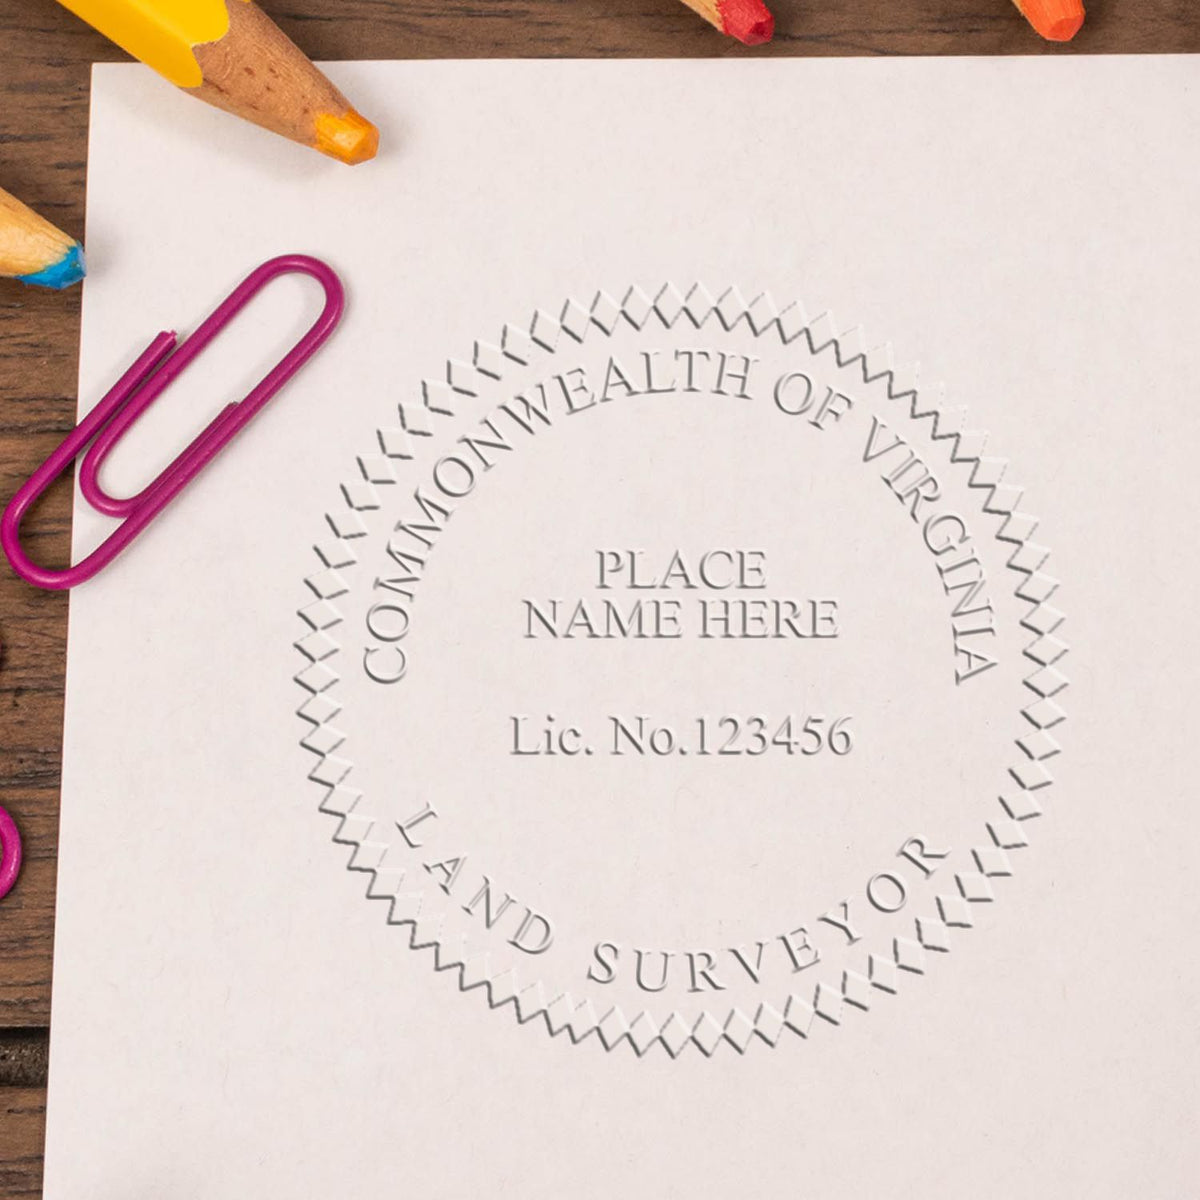 The Gift Virginia Land Surveyor Seal stamp impression comes to life with a crisp, detailed image stamped on paper - showcasing true professional quality.